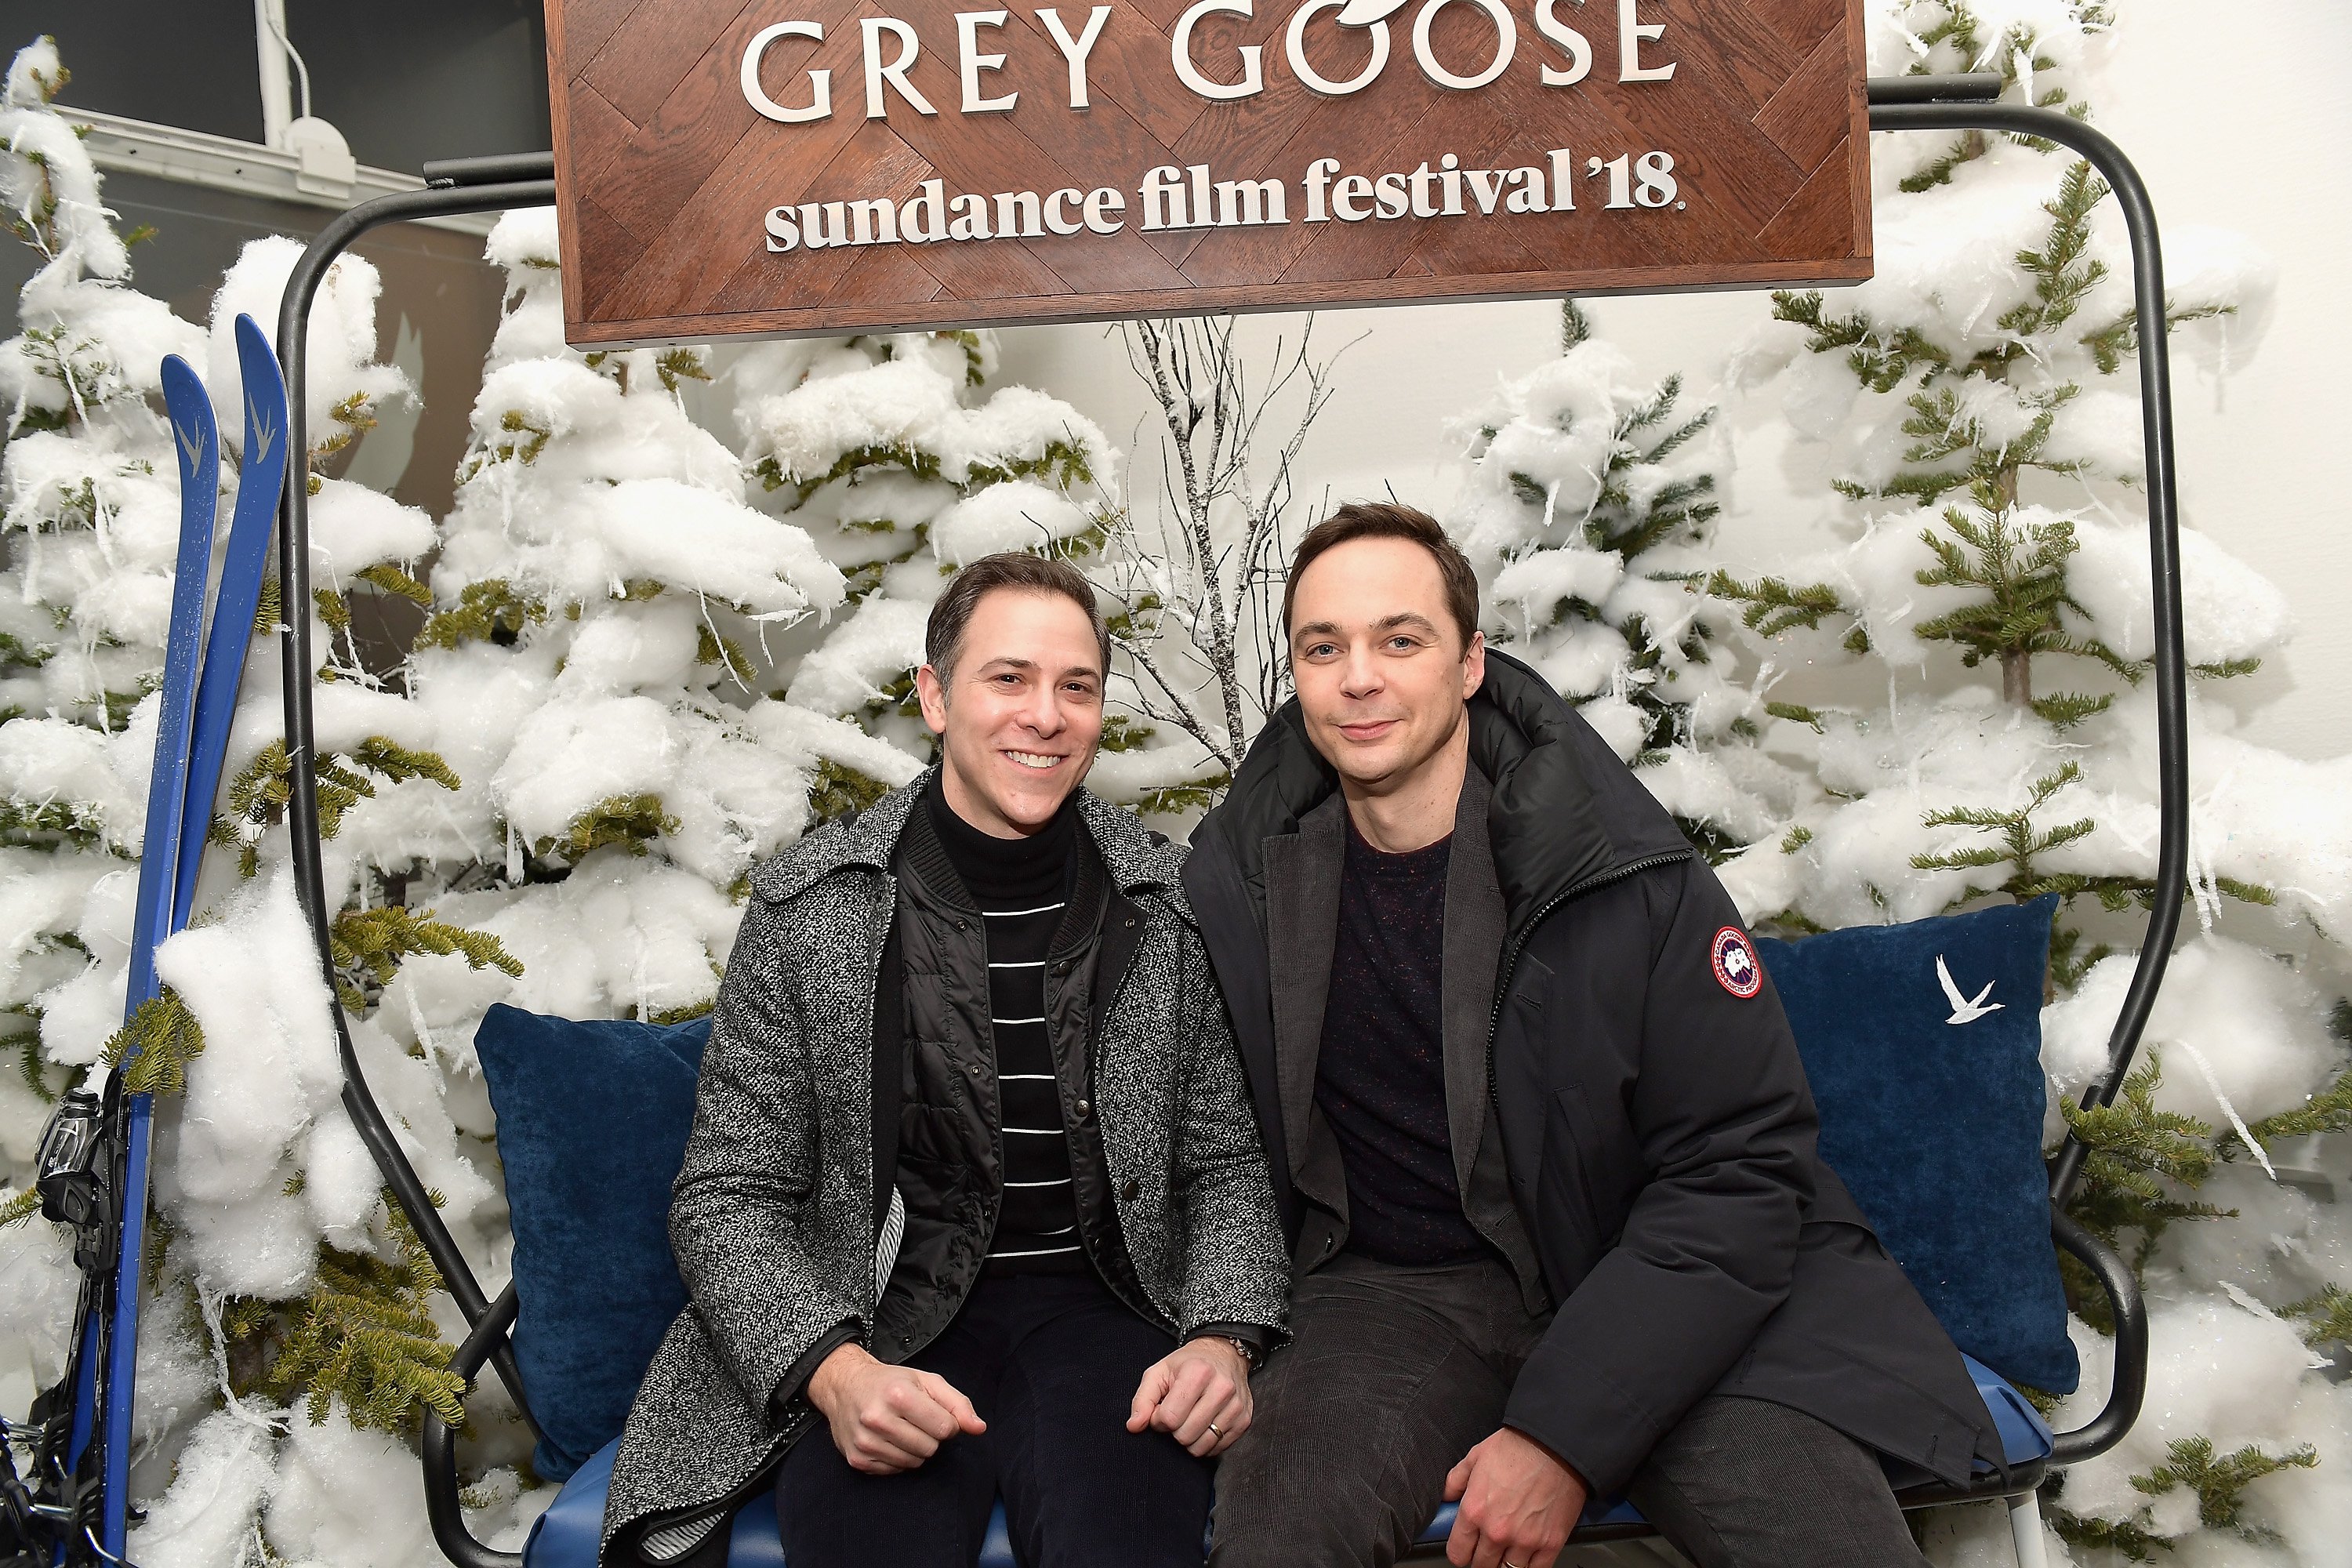 Todd Spiewak and Jim Parsons at the 2018 Sundance Film Festival pre-party for "A Kid Like Jake" on January 23, 2018 | Source: Getty Images